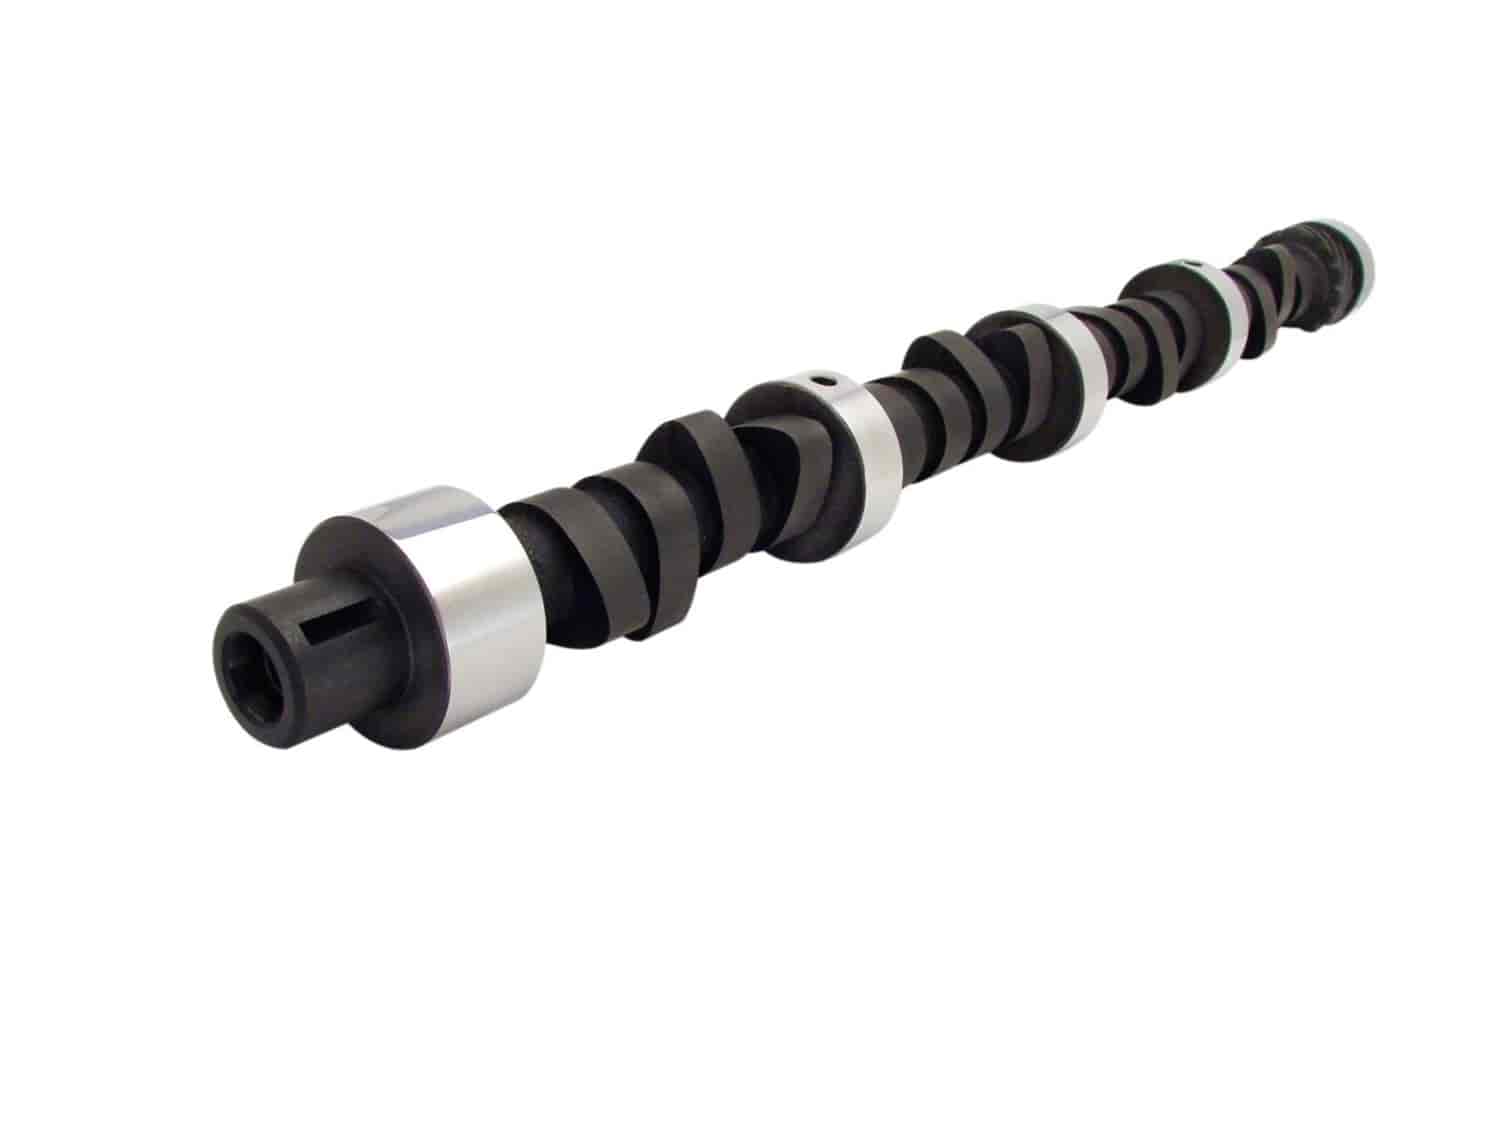 Xtreme Energy 274H Hydraulic Flat Tappet Camshaft Only Lift: .488" /.491" Duration: 274°/286° RPM Range: 1800-6000